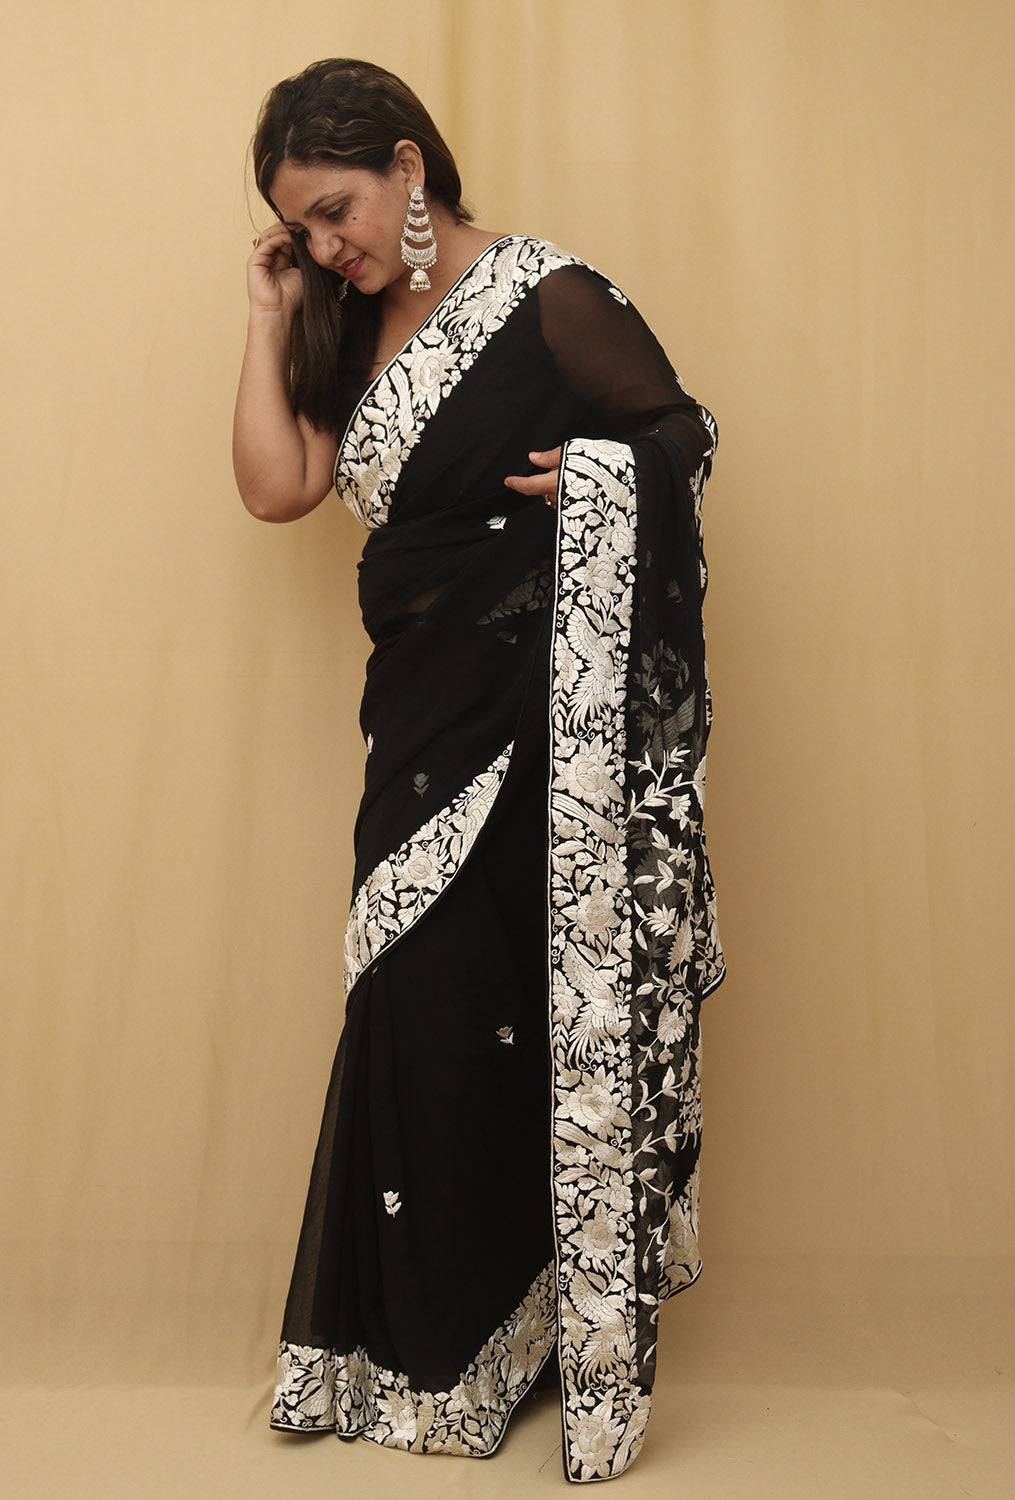 Exquisite Black Hand Embroidered Parsi Gara Saree with Pure Georgette and Floral Design - Luxurion World